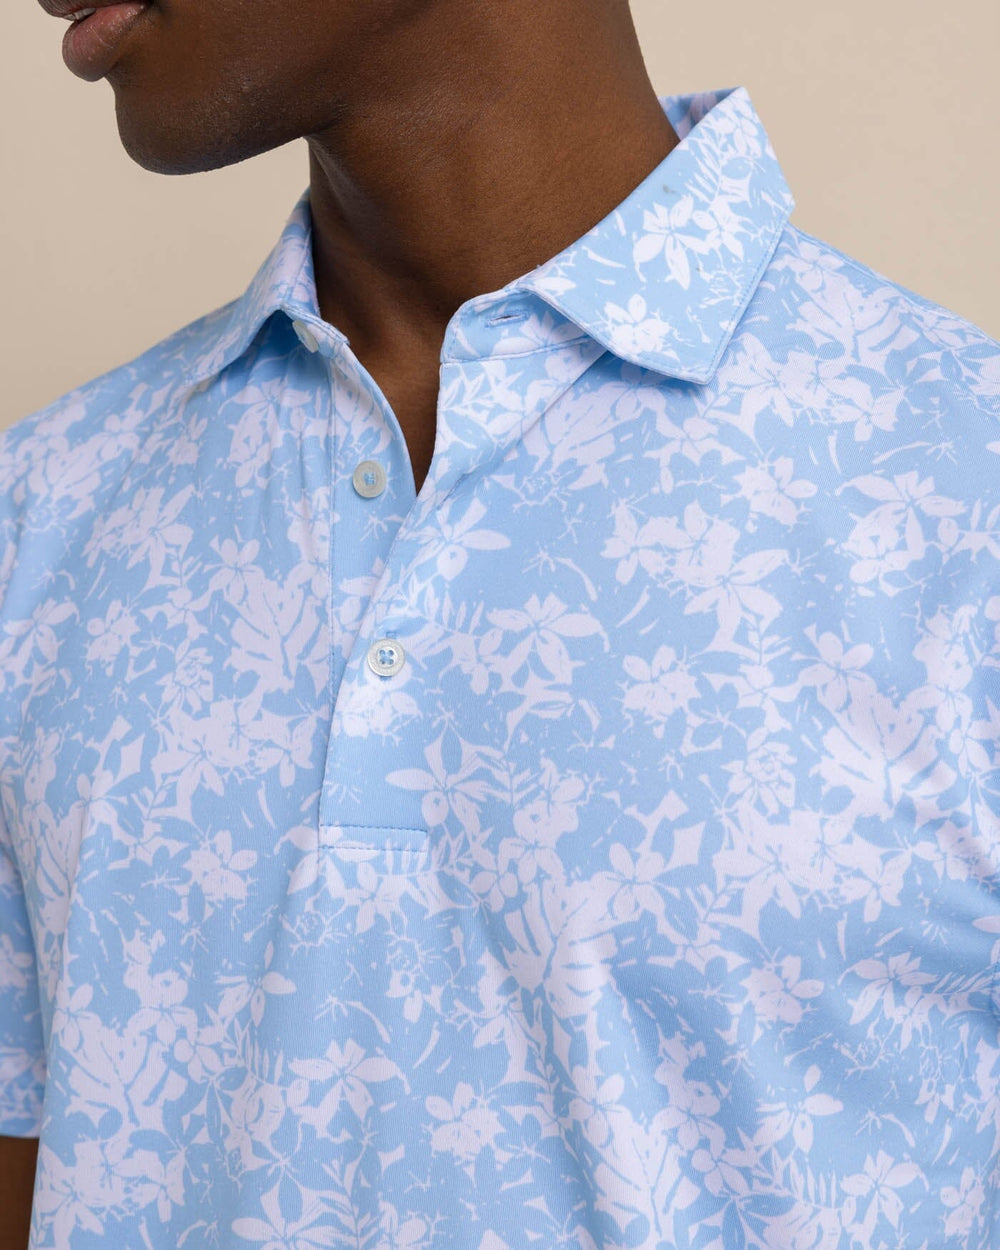 The detail view of the Southern Tide Driver Island Blooms Printed Polo by Southern Tide - Clearwater Blue